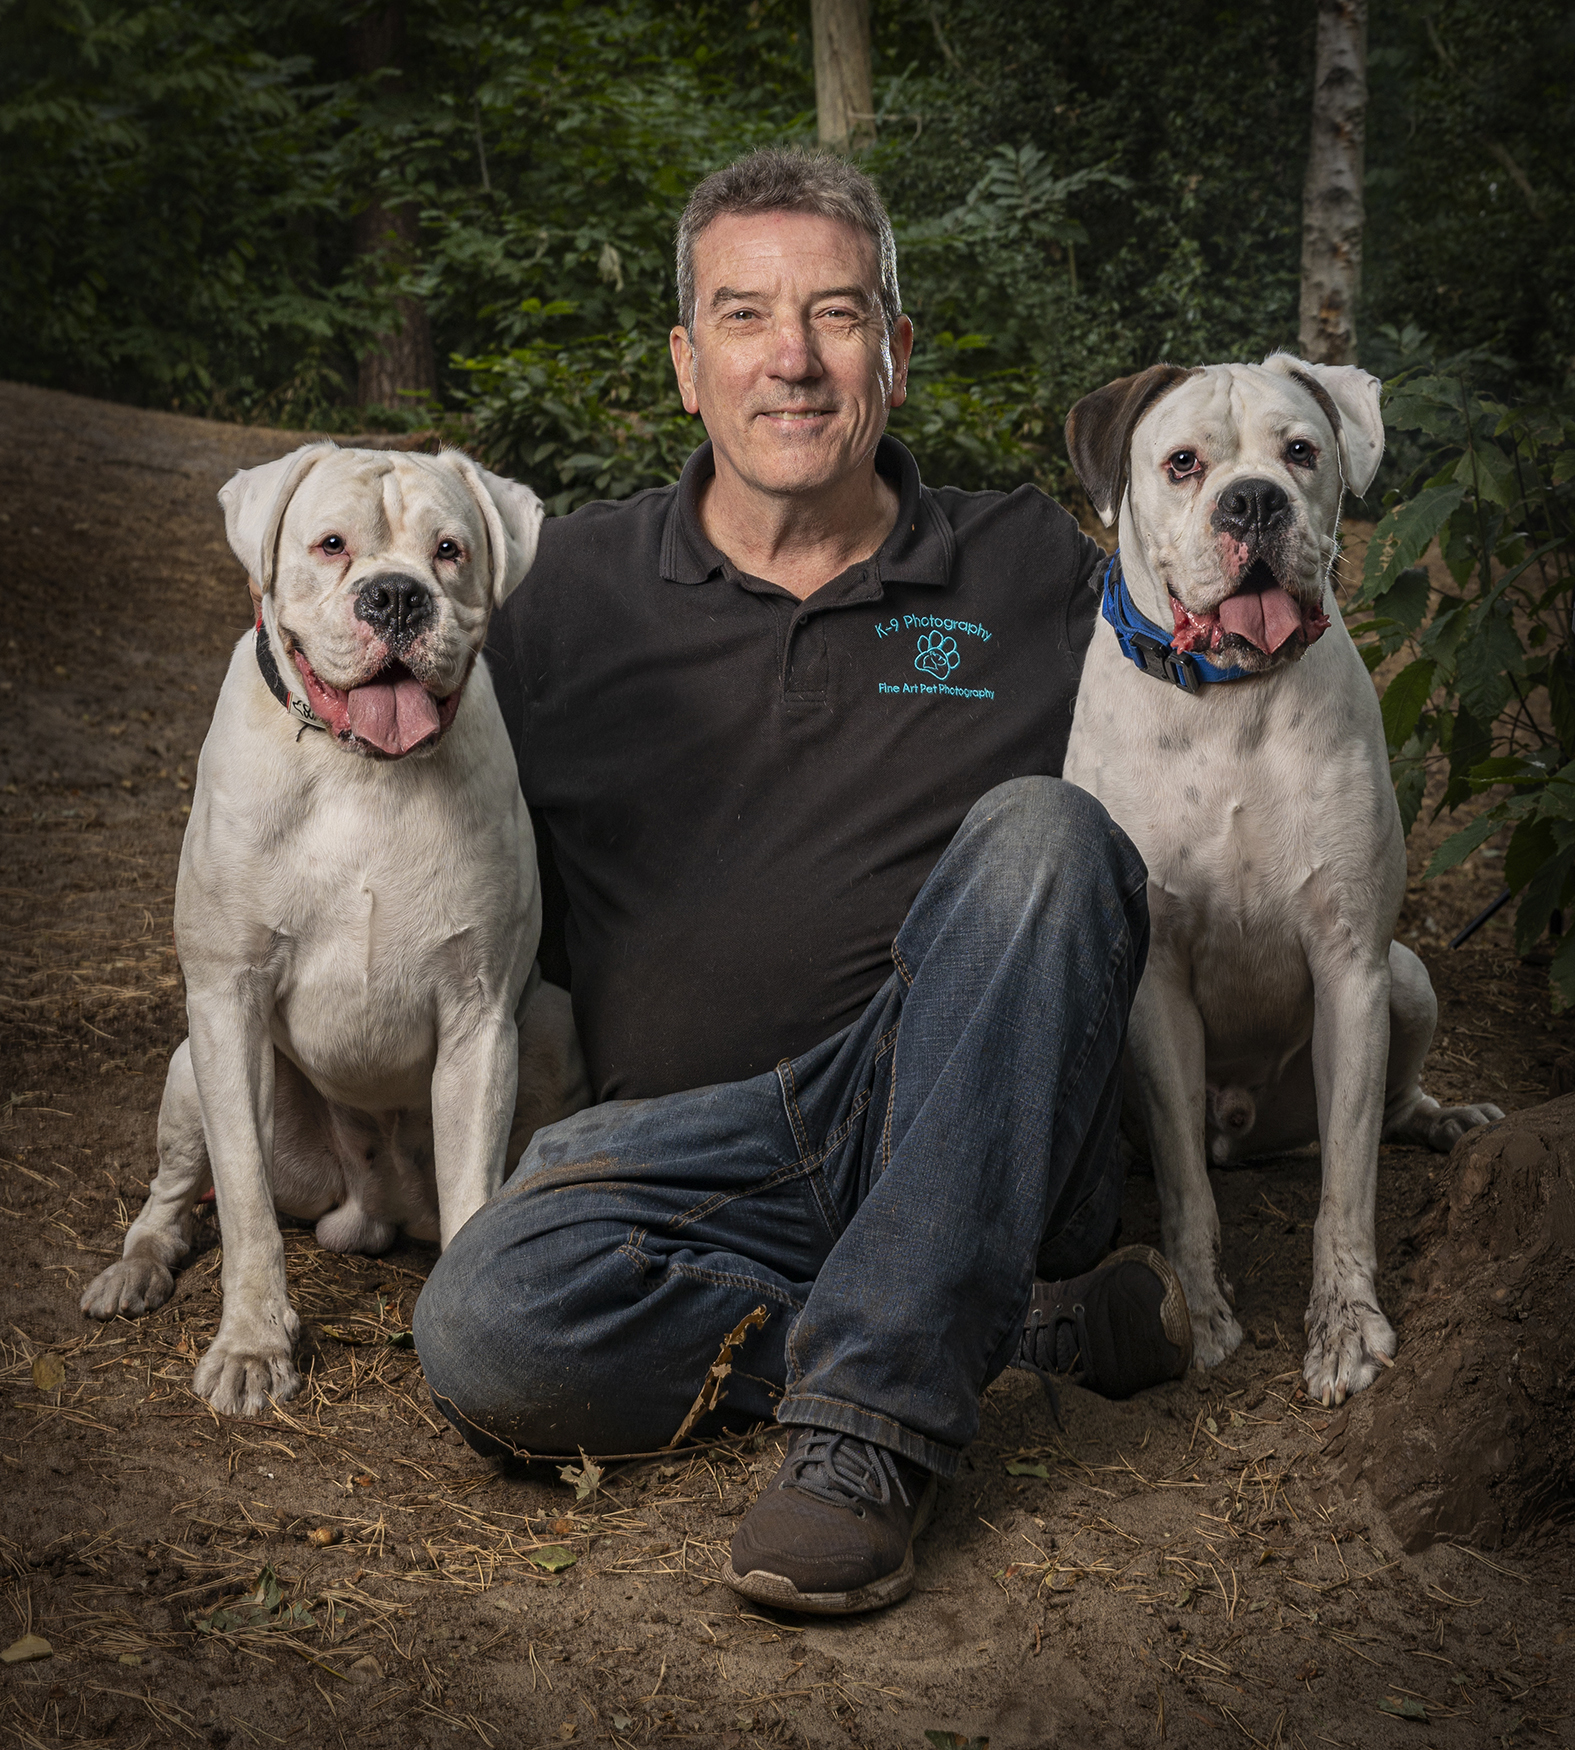 the dog photographer - Adrian Bullers provides International award winning dog photography, based in Bedford, London and the UK